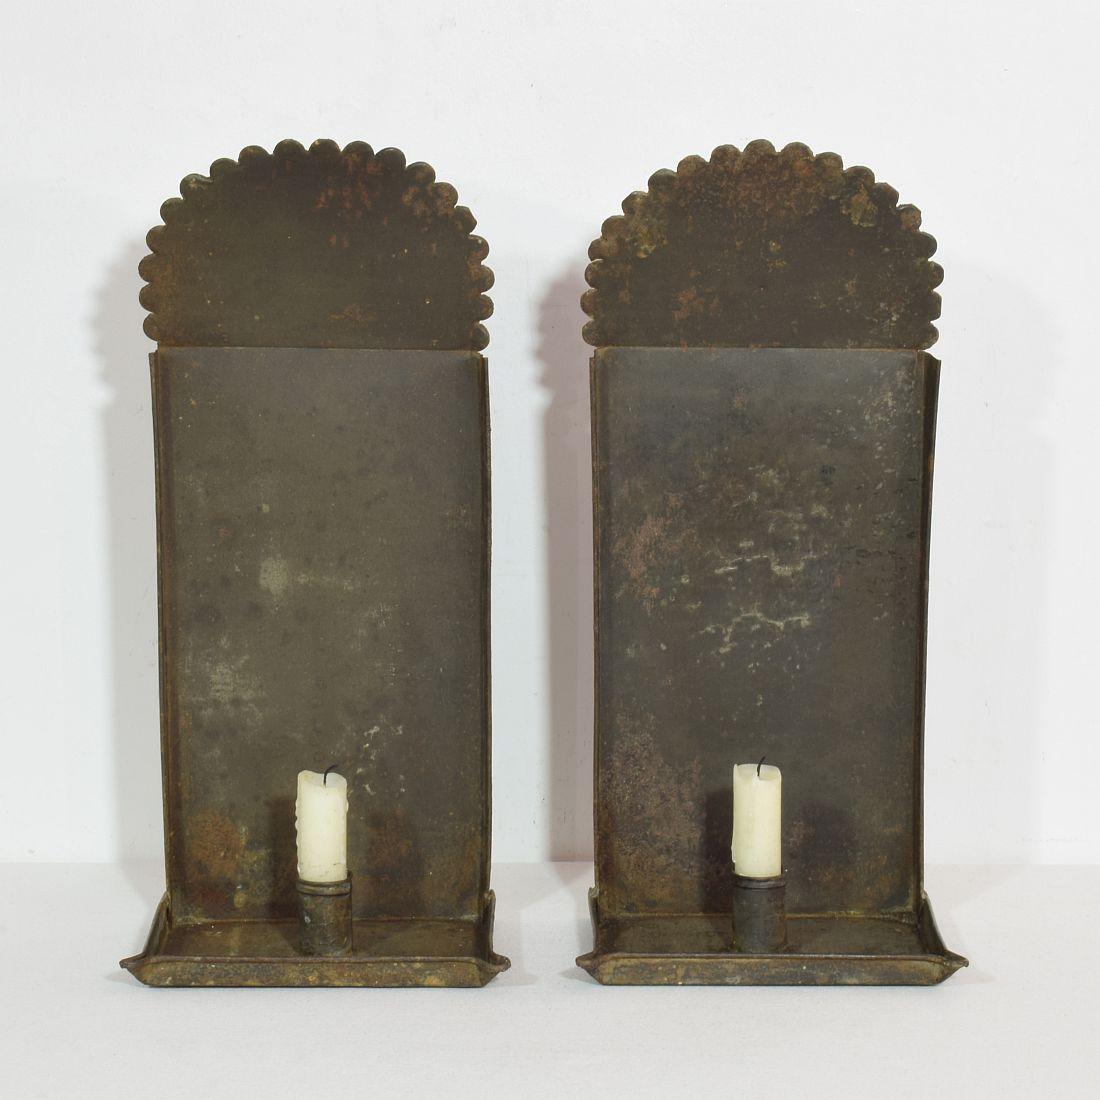 Unique pair of iron wall candleholders.
France circa 1770-1850
Weathered.